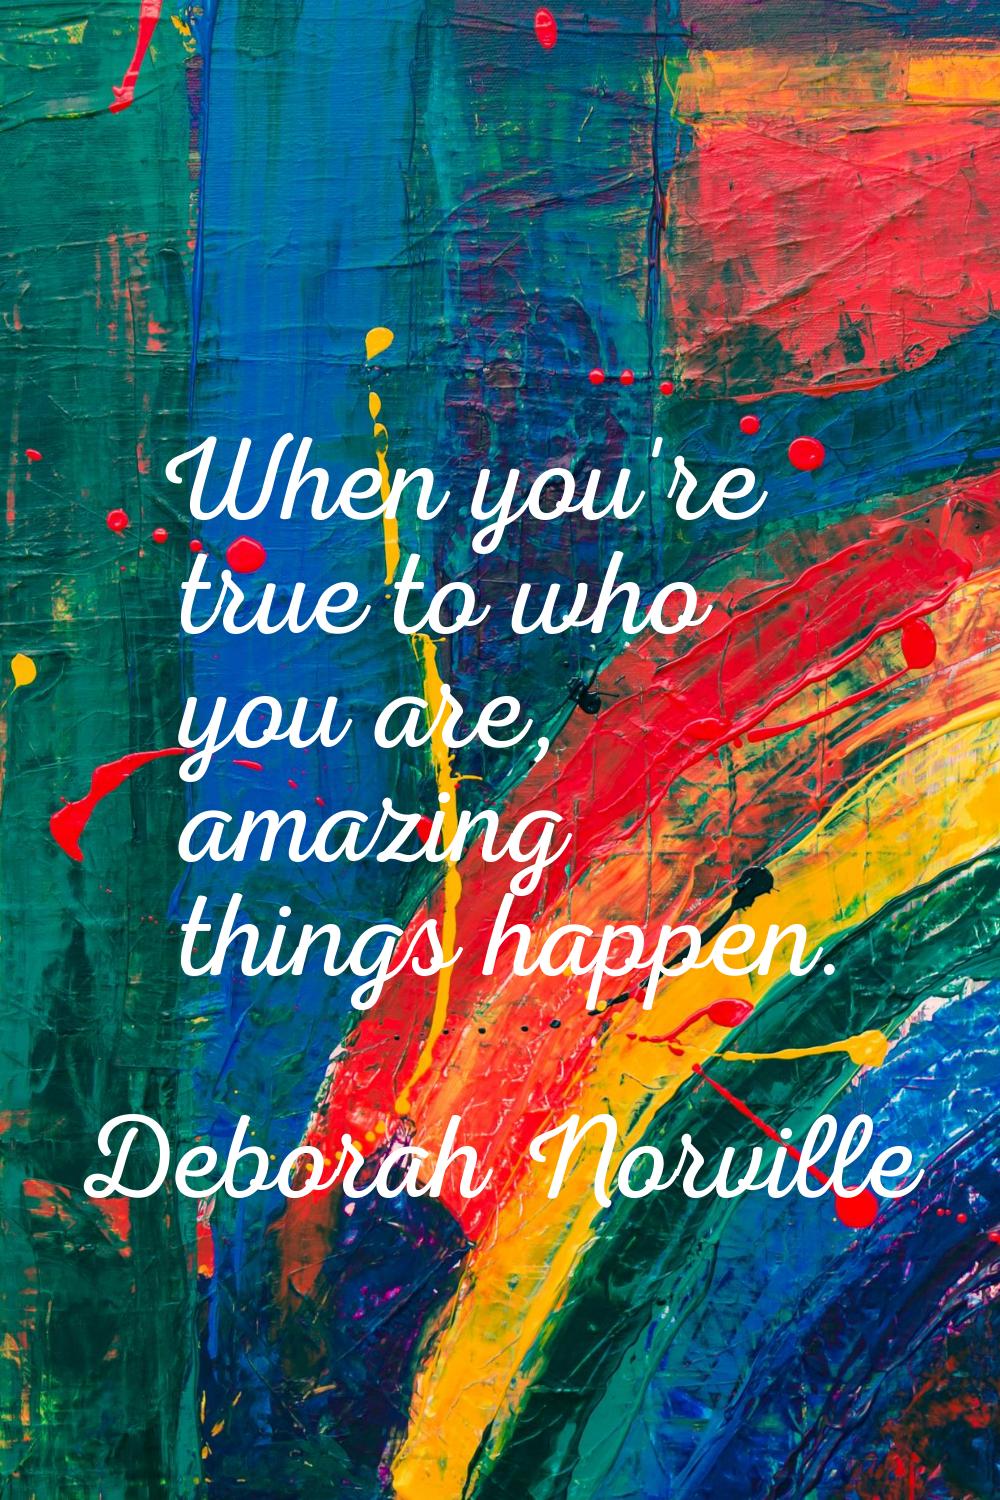 When you're true to who you are, amazing things happen.